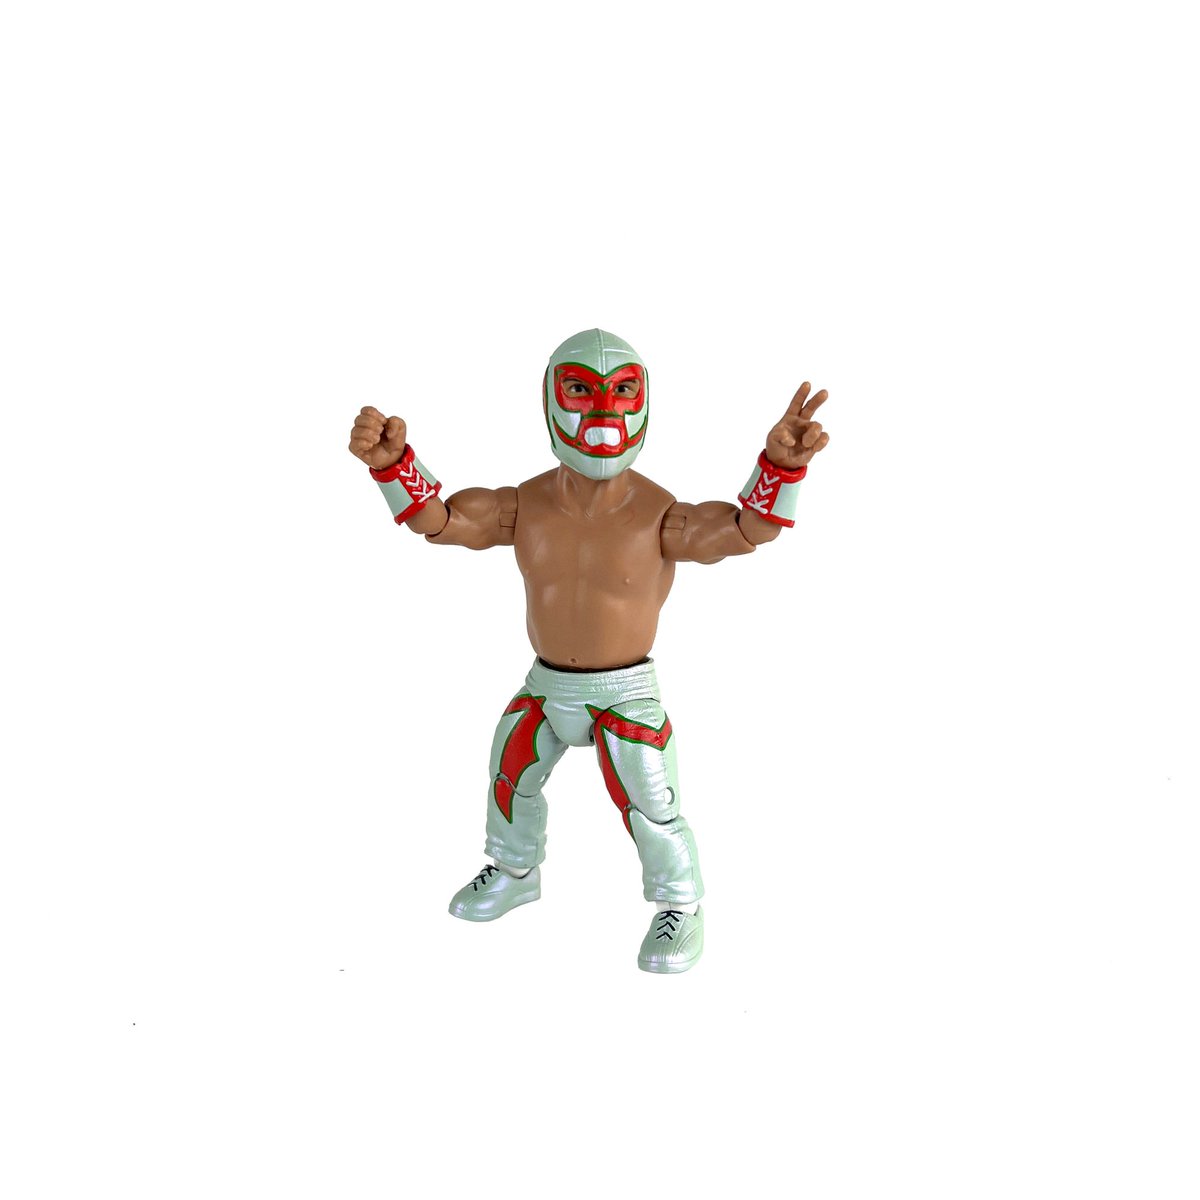 We're keeping the wrestling love coming with some more sneak peeks of our brand new #MLWFusion line. Place your preorder today to be among the first to add #EJNduka, #LinceDorado, #Microman to your collection!tinyurl.com/jt48aj76  #MLW #Wrestling #WrestlingFigures